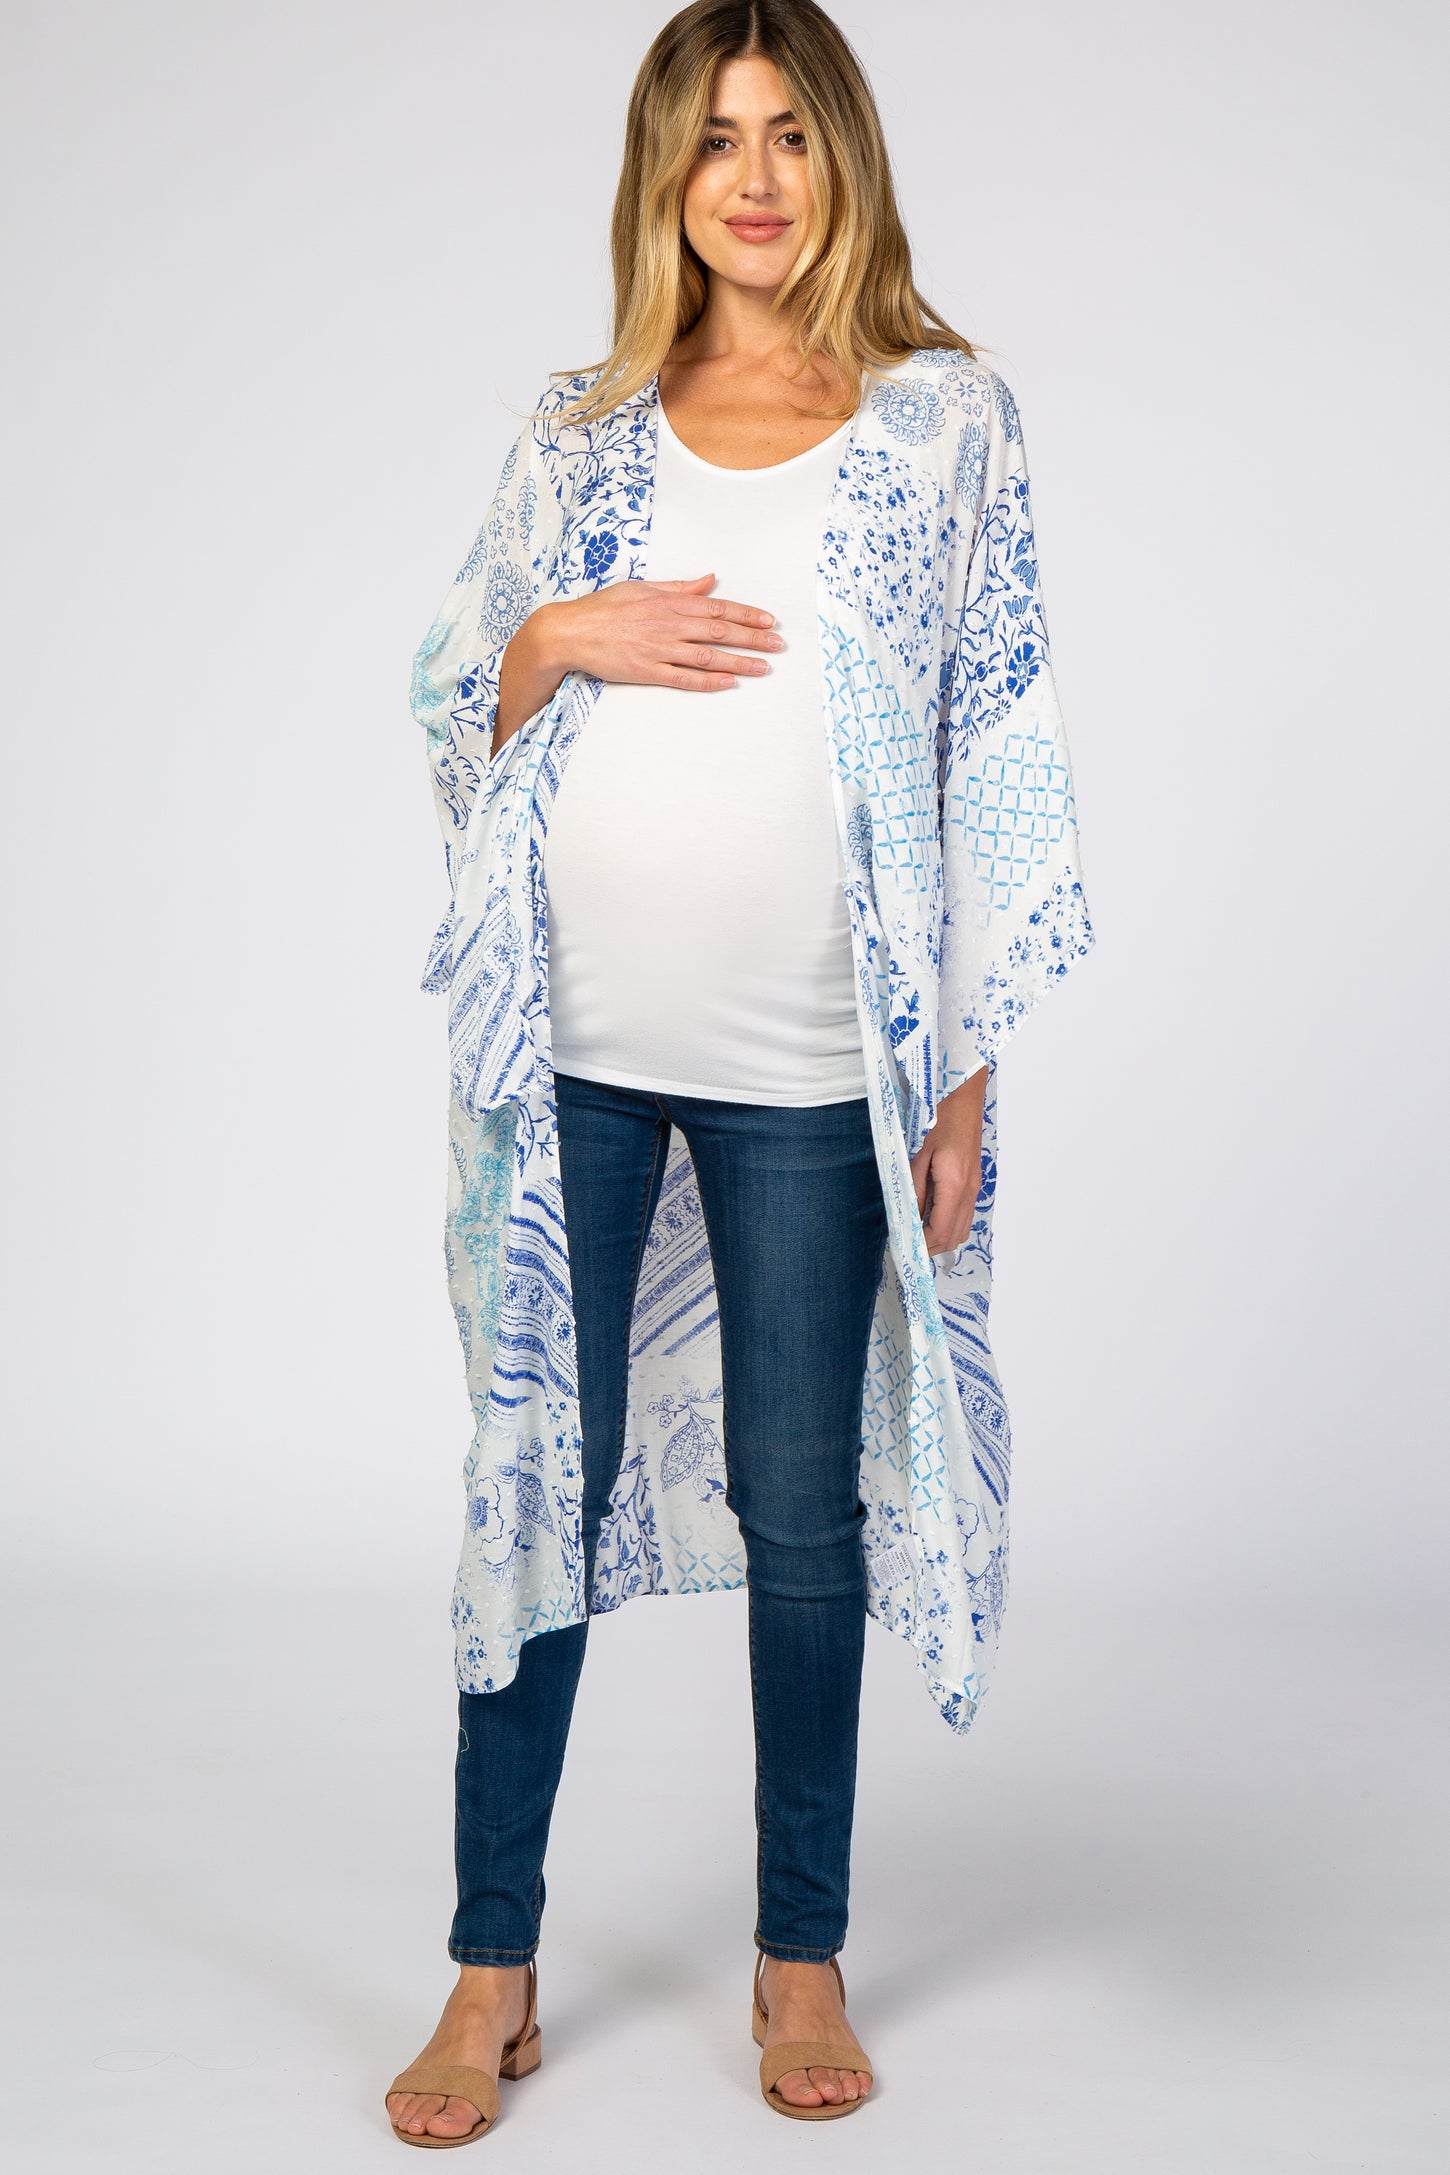 Blue Multi Print Textured Maternity Coverup